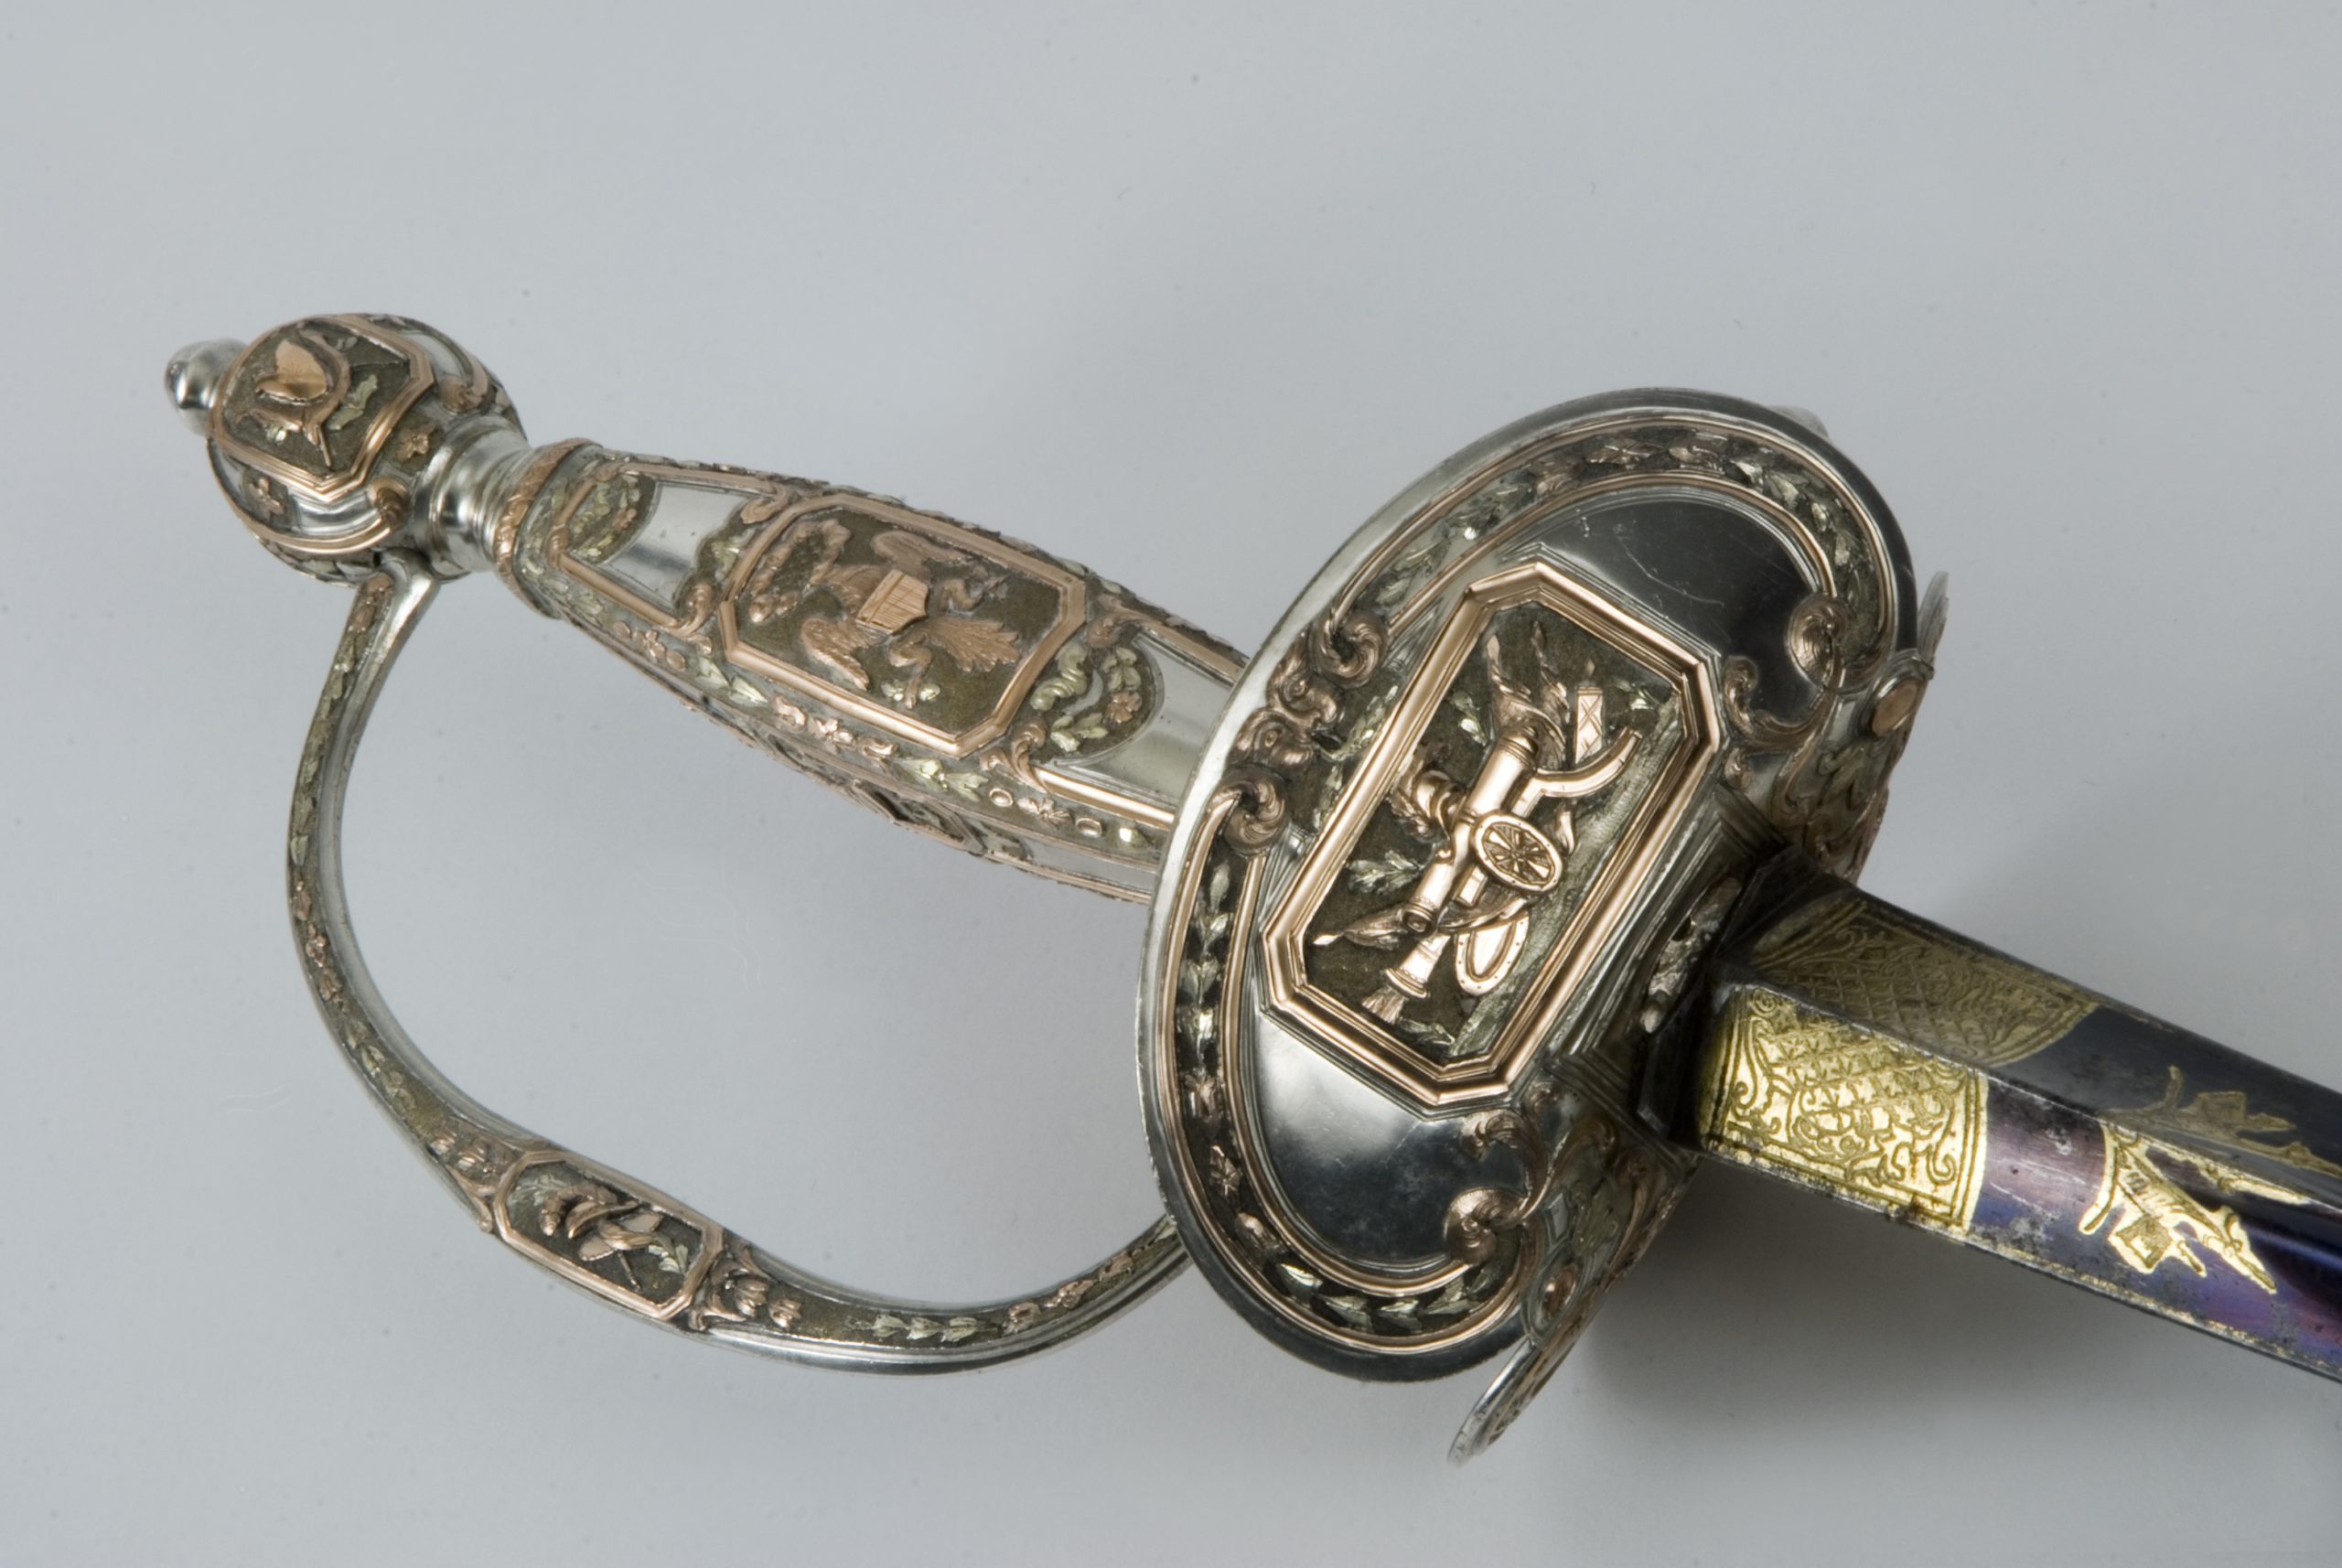 Angled detail of a silver and gold presentation sword hilt